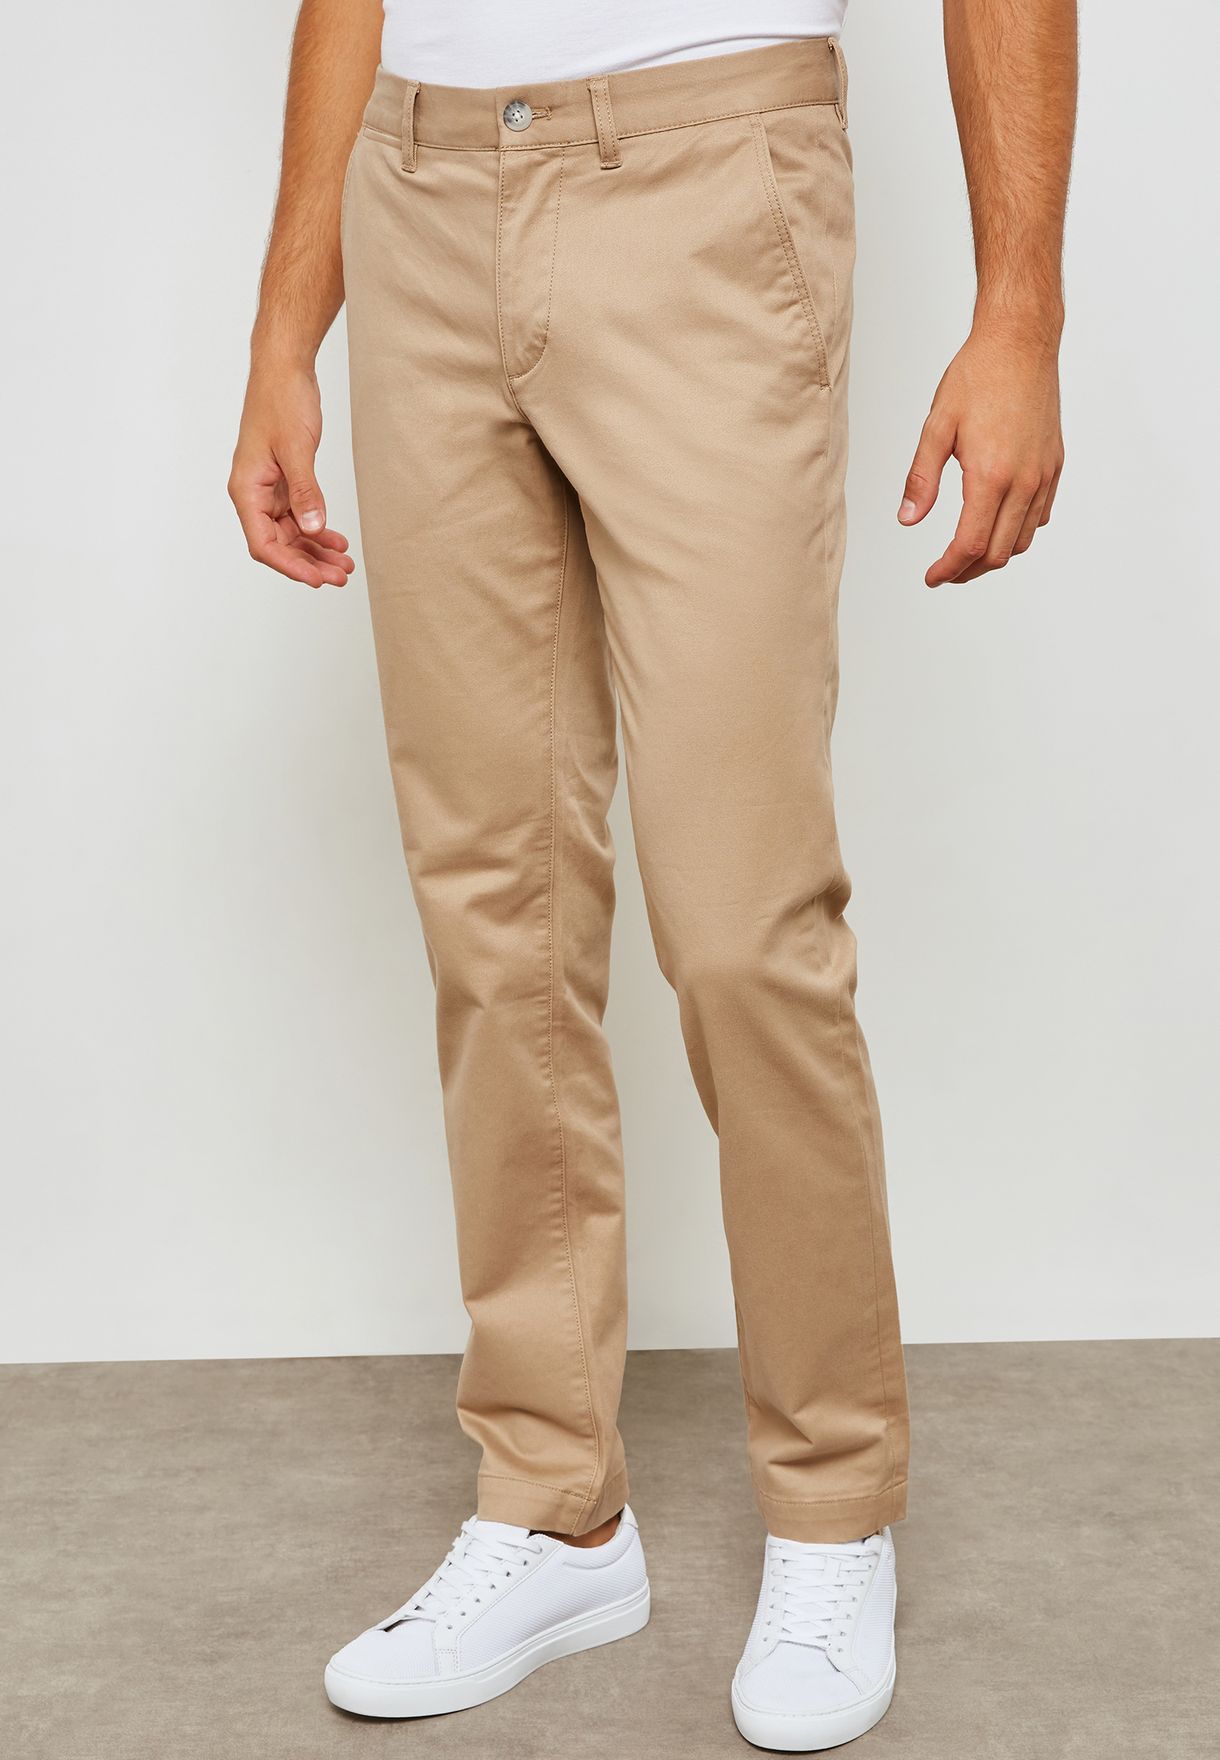 Buy Lacoste beige Slim Fit Chinos for 